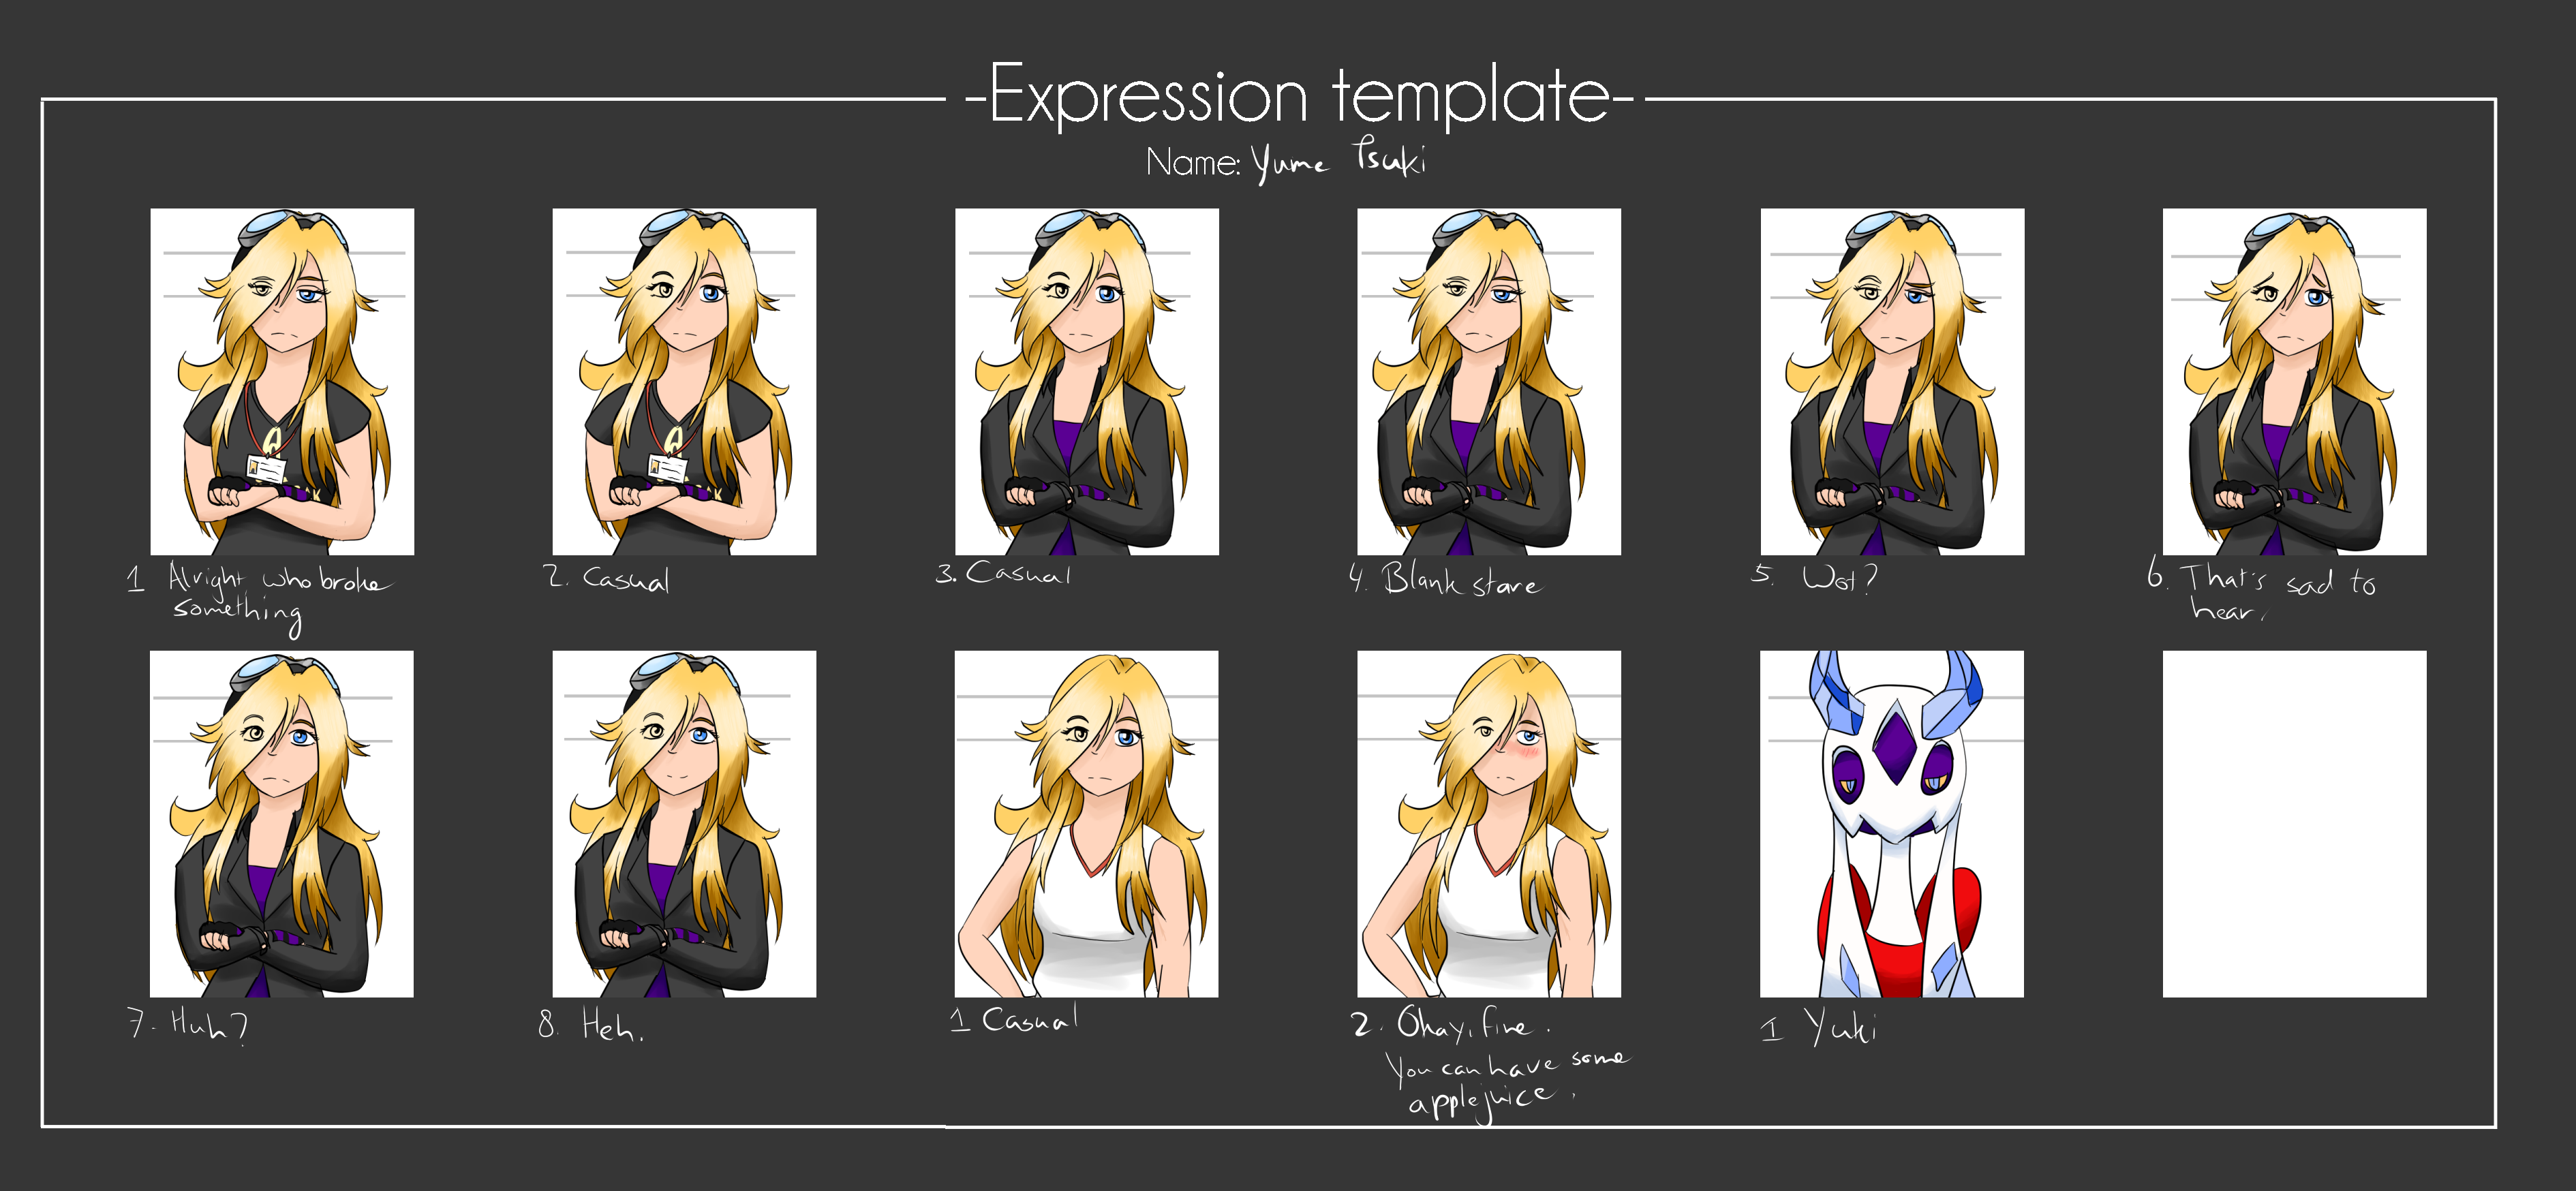 vn_expression_template__yume__other_outfits__by_froslassmaniac-d94x1xw.png